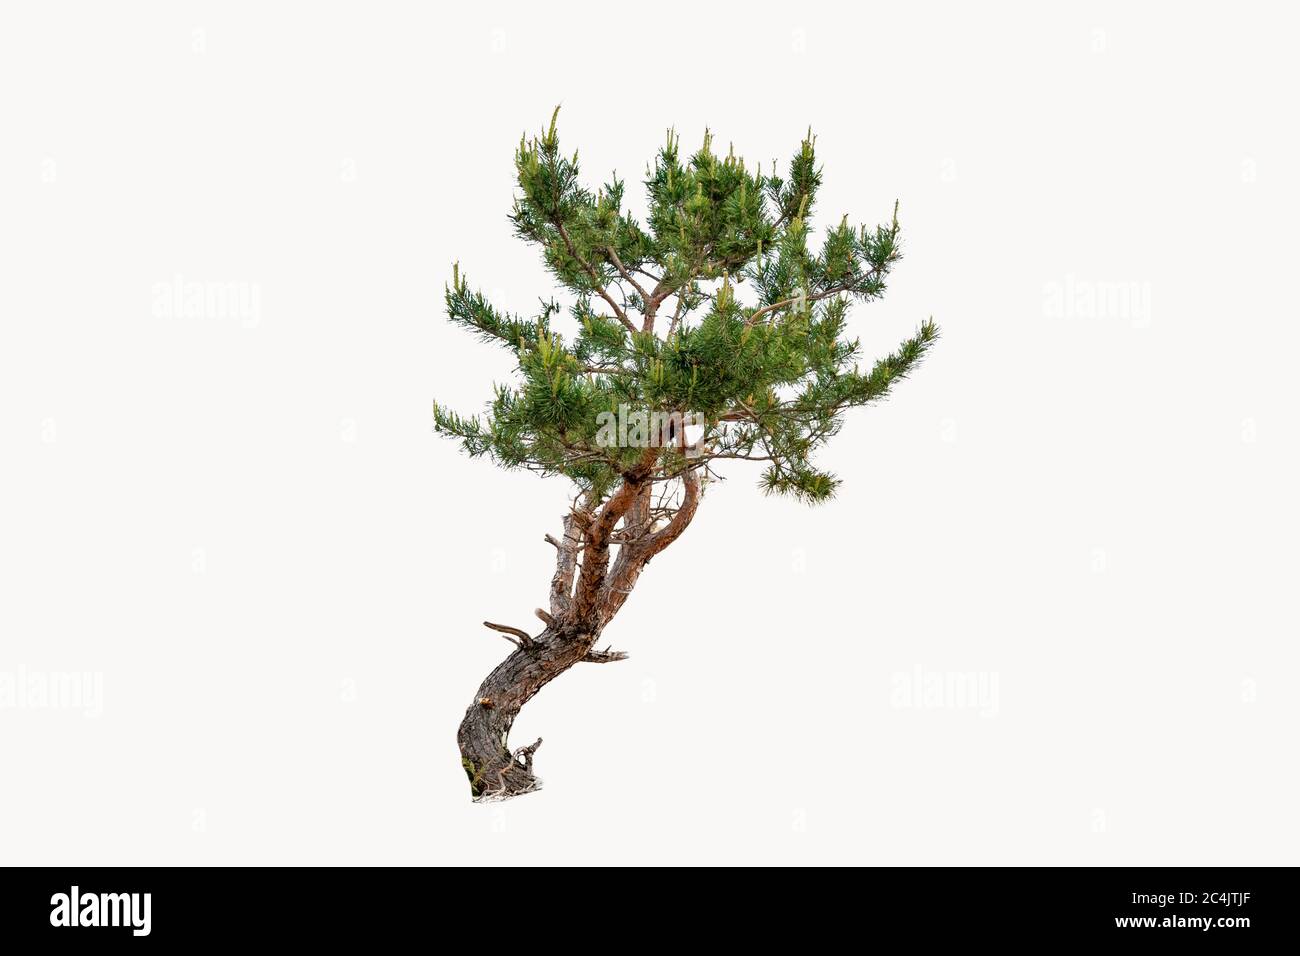 Curvy pine tree with green fur isolated on white background Stock Photo